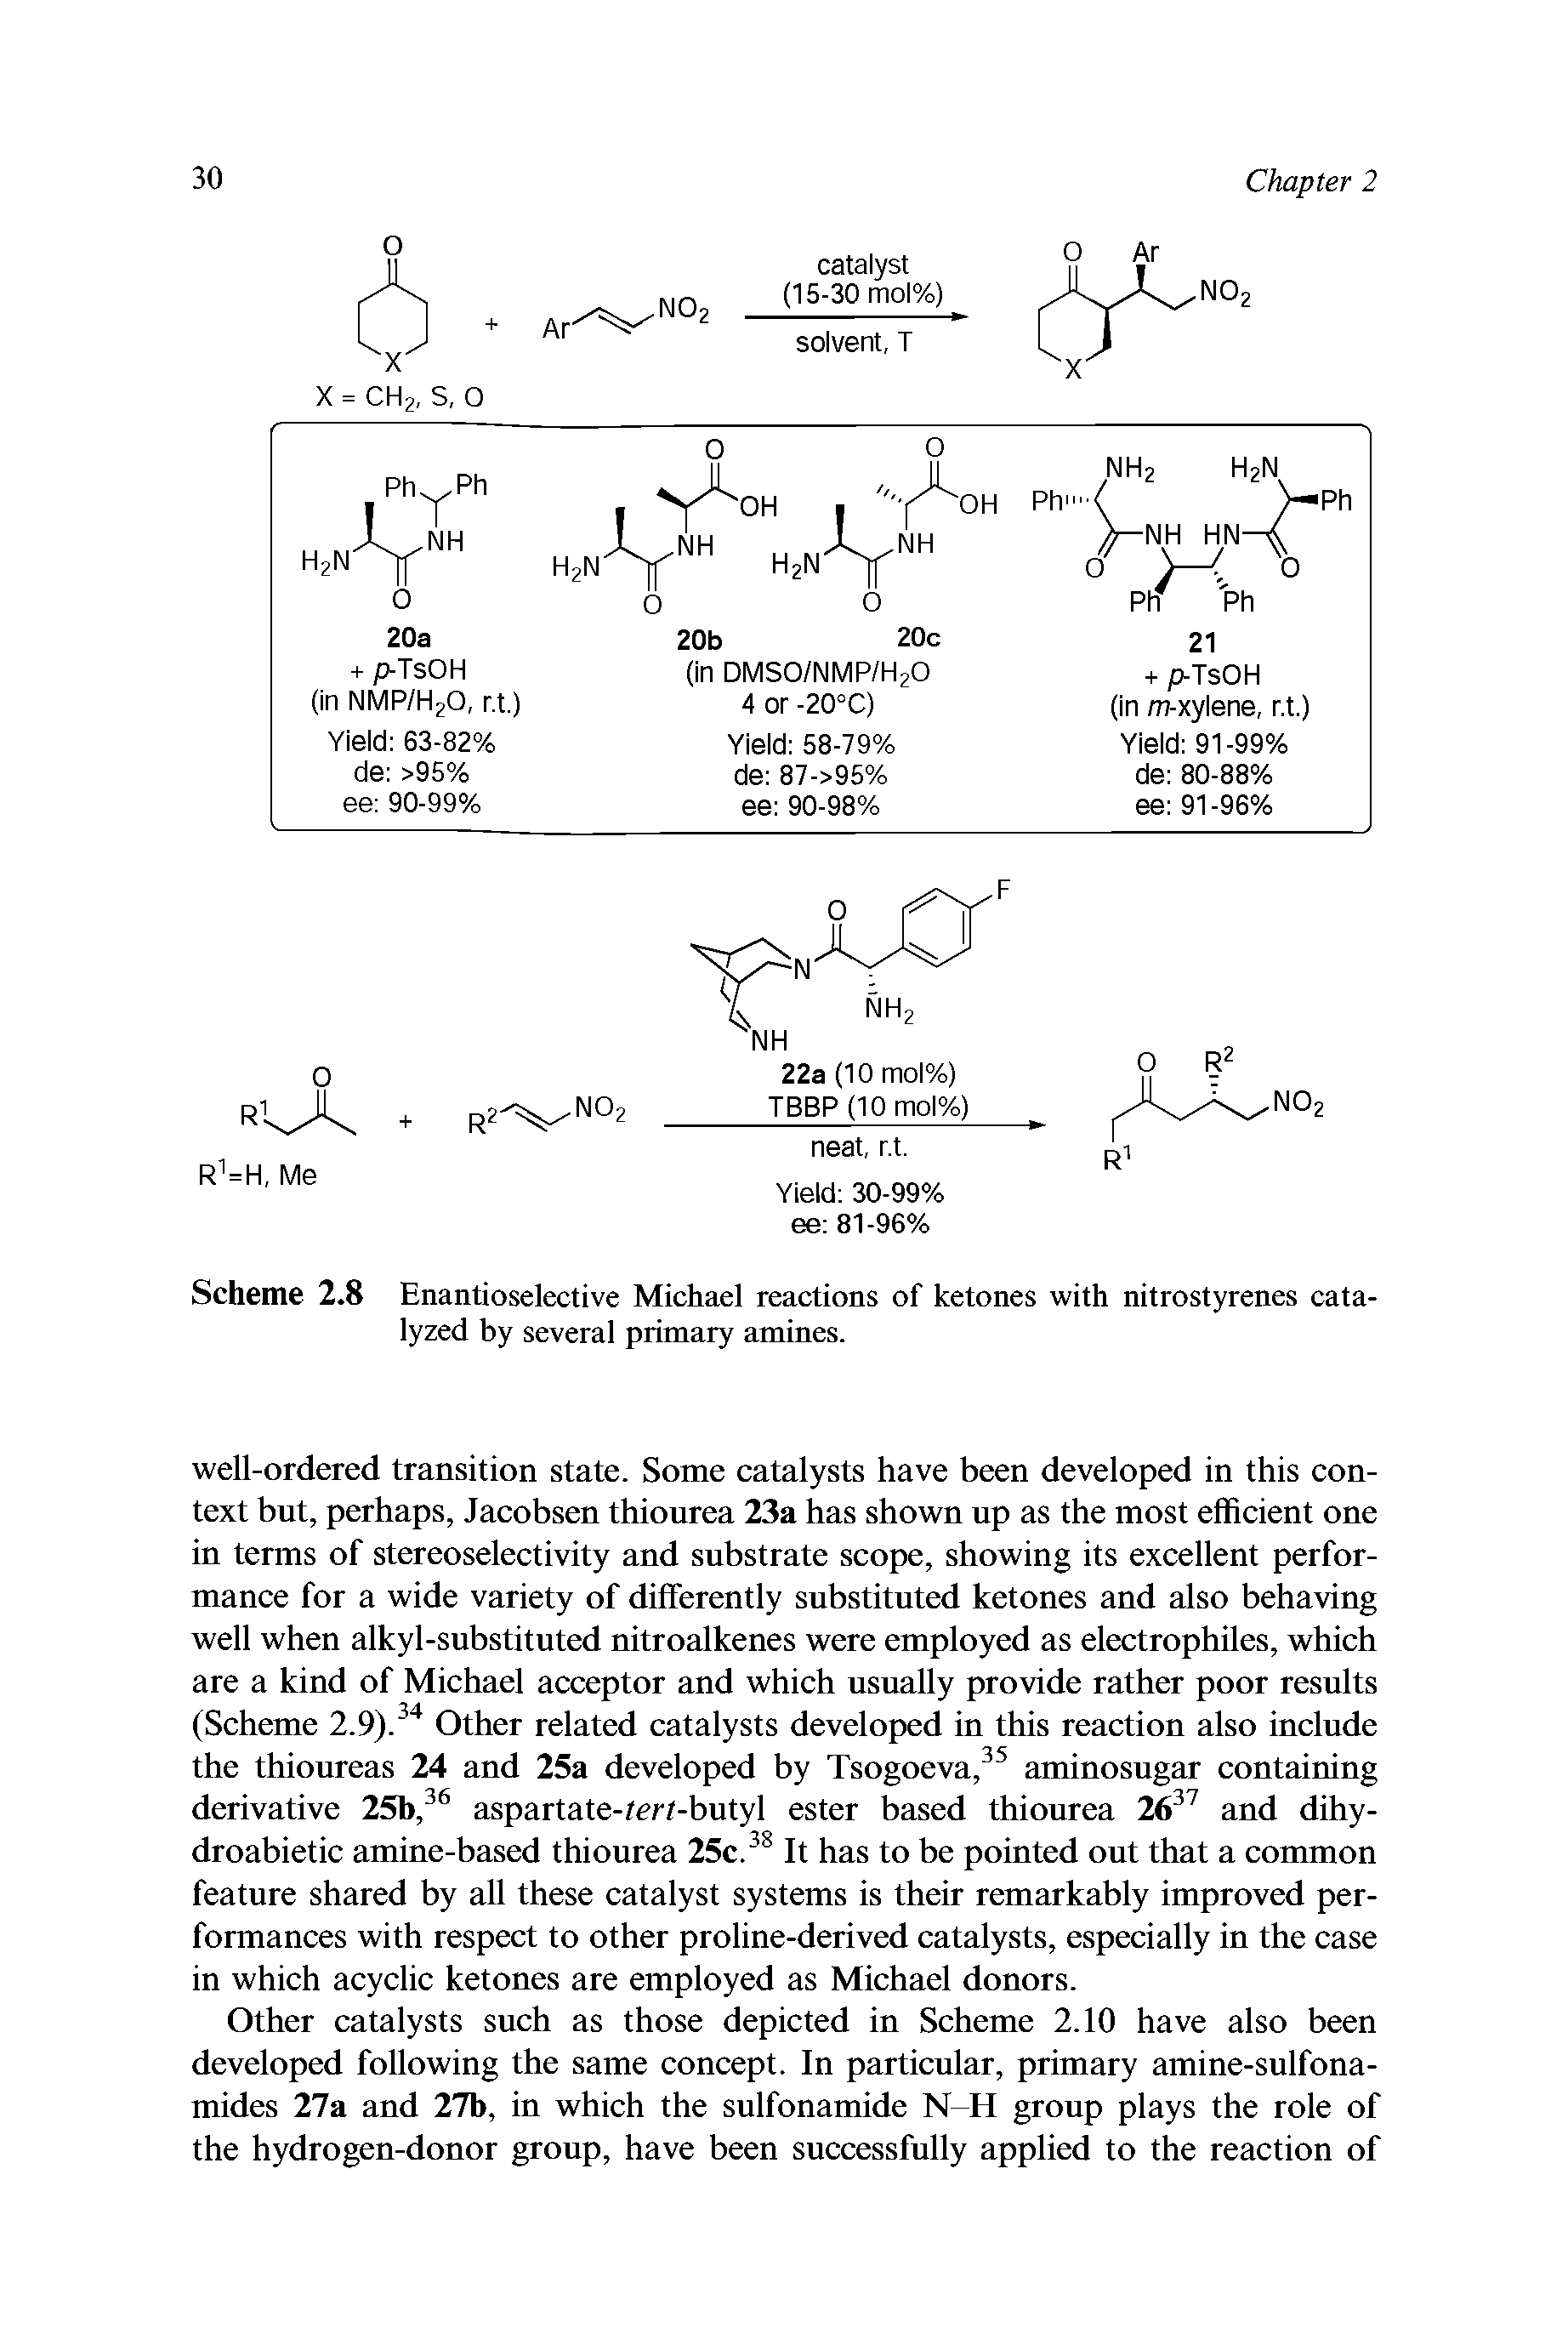 Scheme 2.8 Enantioselective Michael reactions of ketones with nitrostyrenes catalyzed by several primary amines.